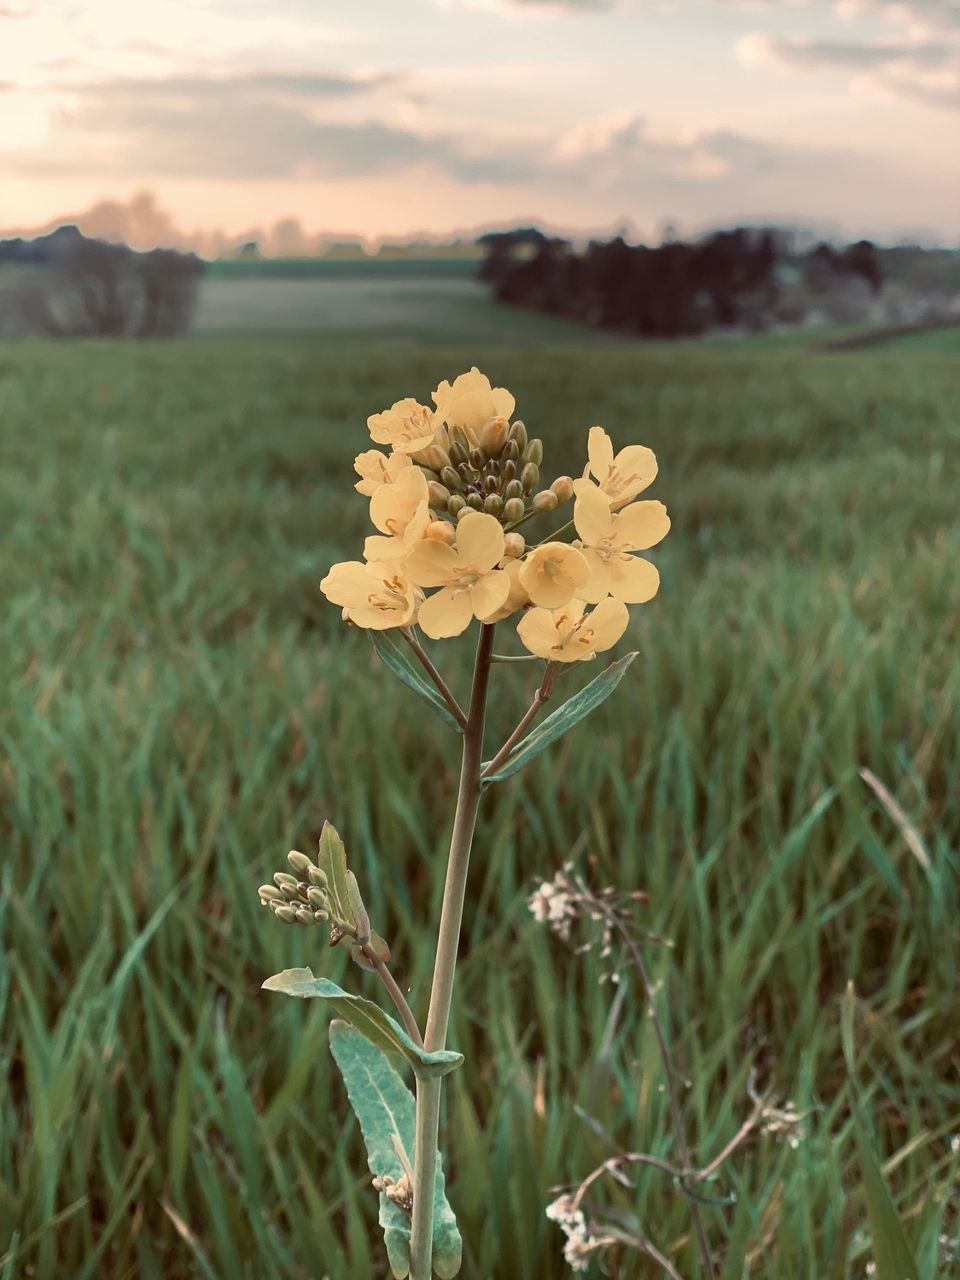 flower, plant, flowering plant, beauty in nature, growth, land, fragility, vulnerability, freshness, field, nature, close-up, petal, focus on foreground, yellow, sky, landscape, flower head, tranquility, inflorescence, no people, outdoors